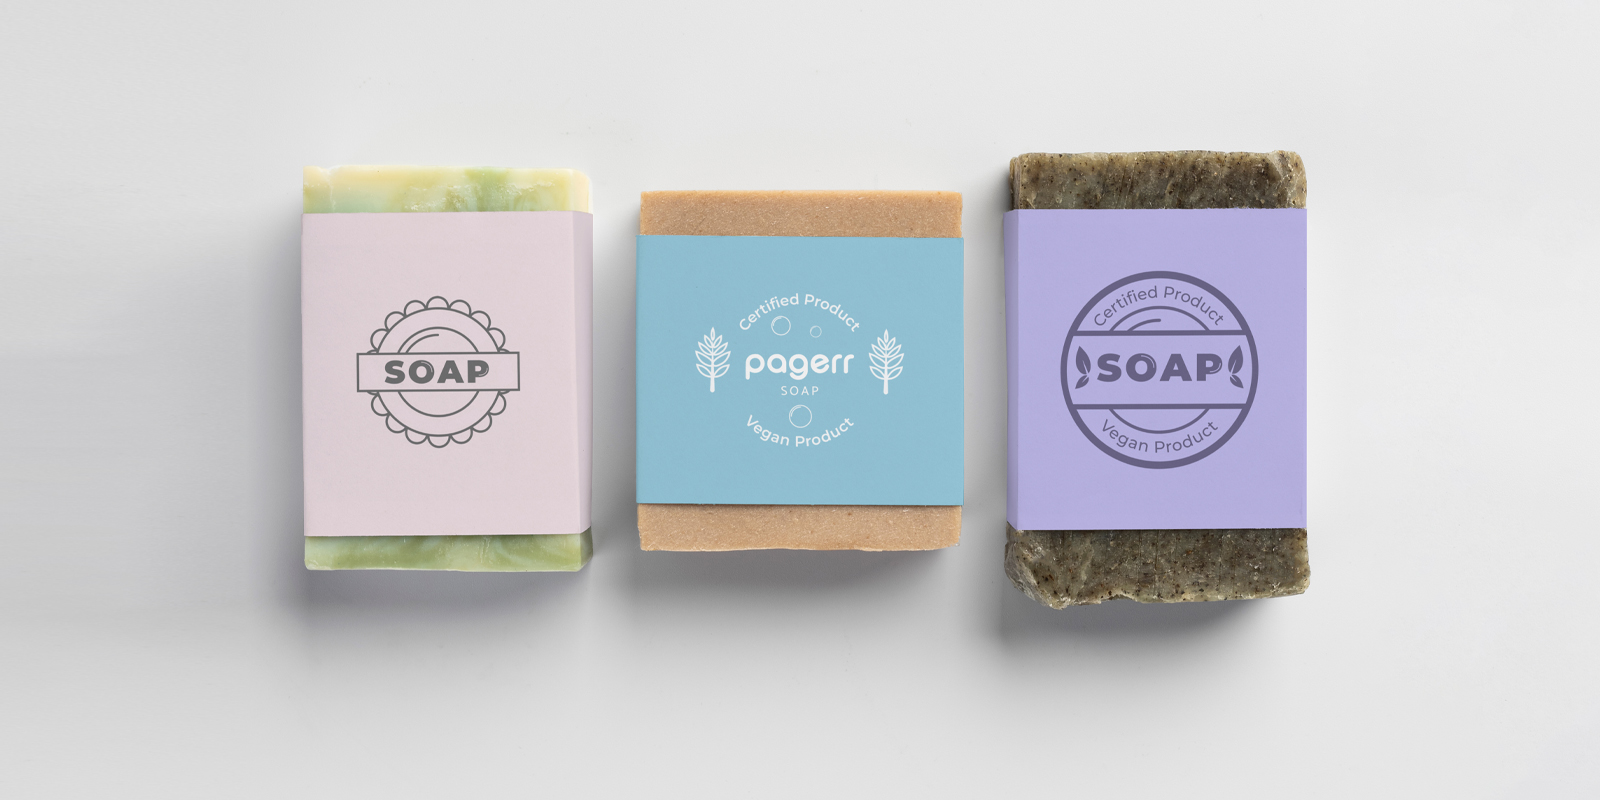 Soap labels in Valencia - Print with Pagerr